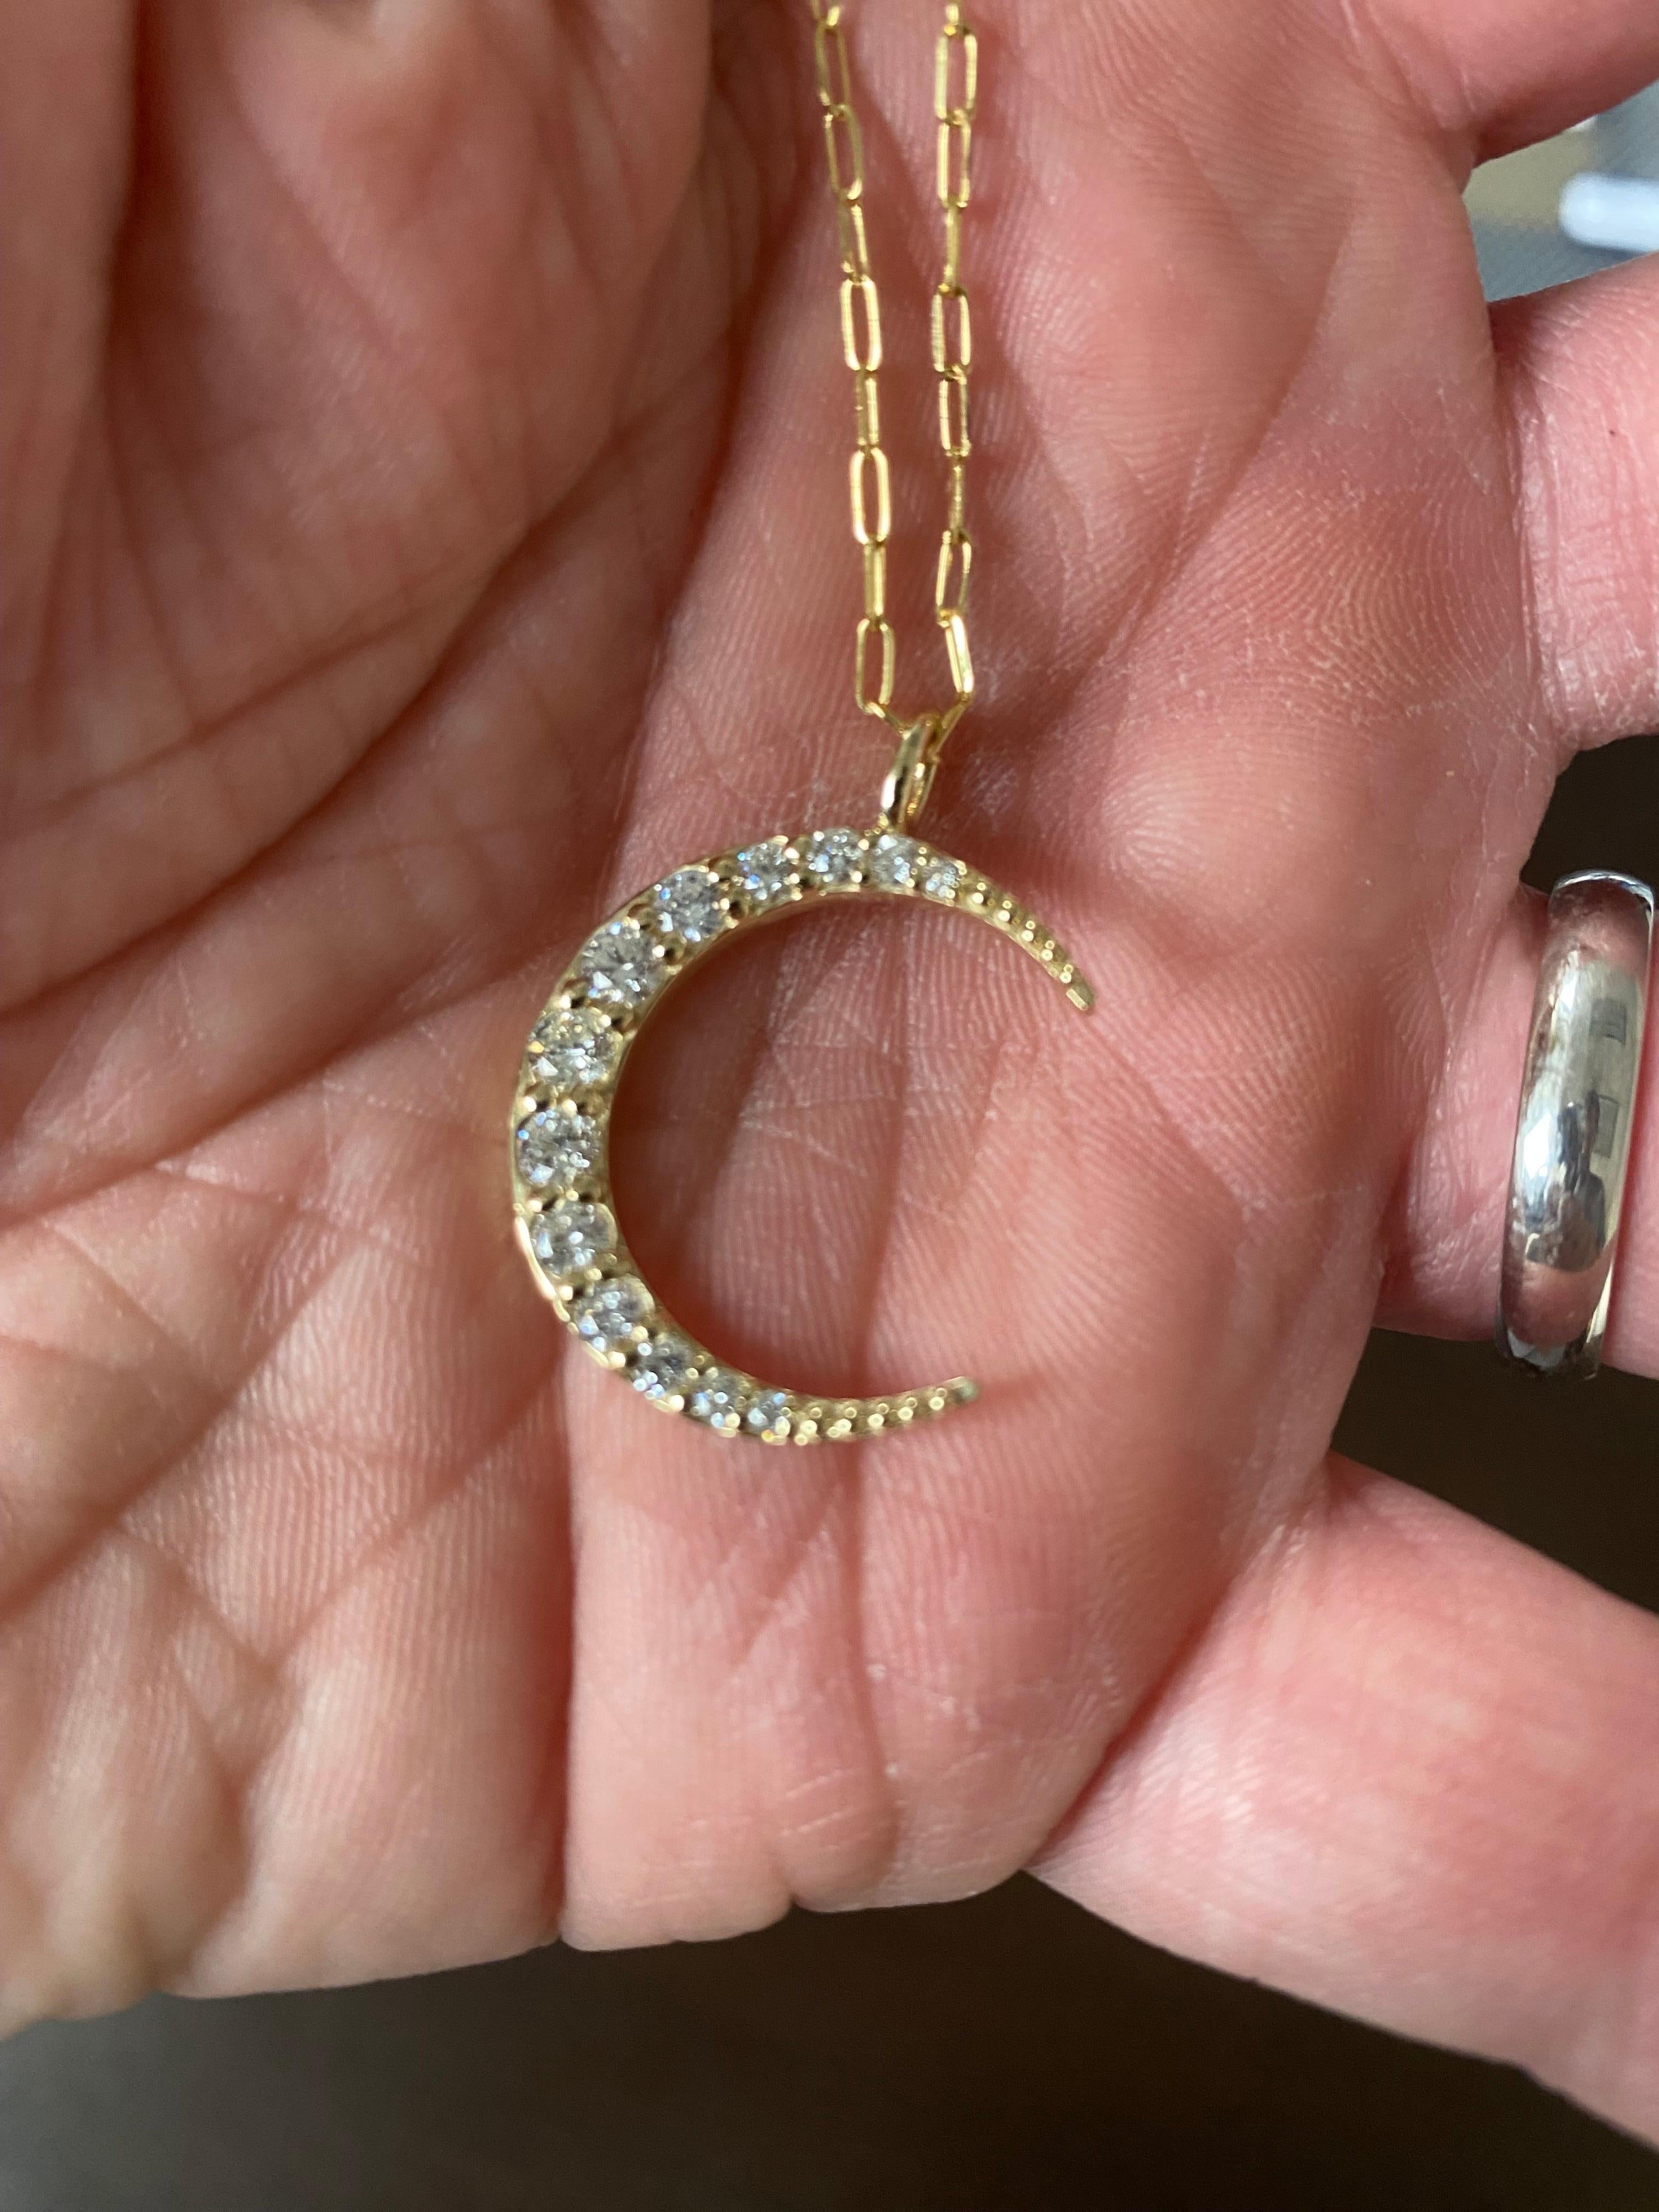 Graduated diamond moon shaped pendant set in 14K yellow gold. The total diamond weight is 1.37 carats. The color of the stones are G-H, the clarity is SI2. 